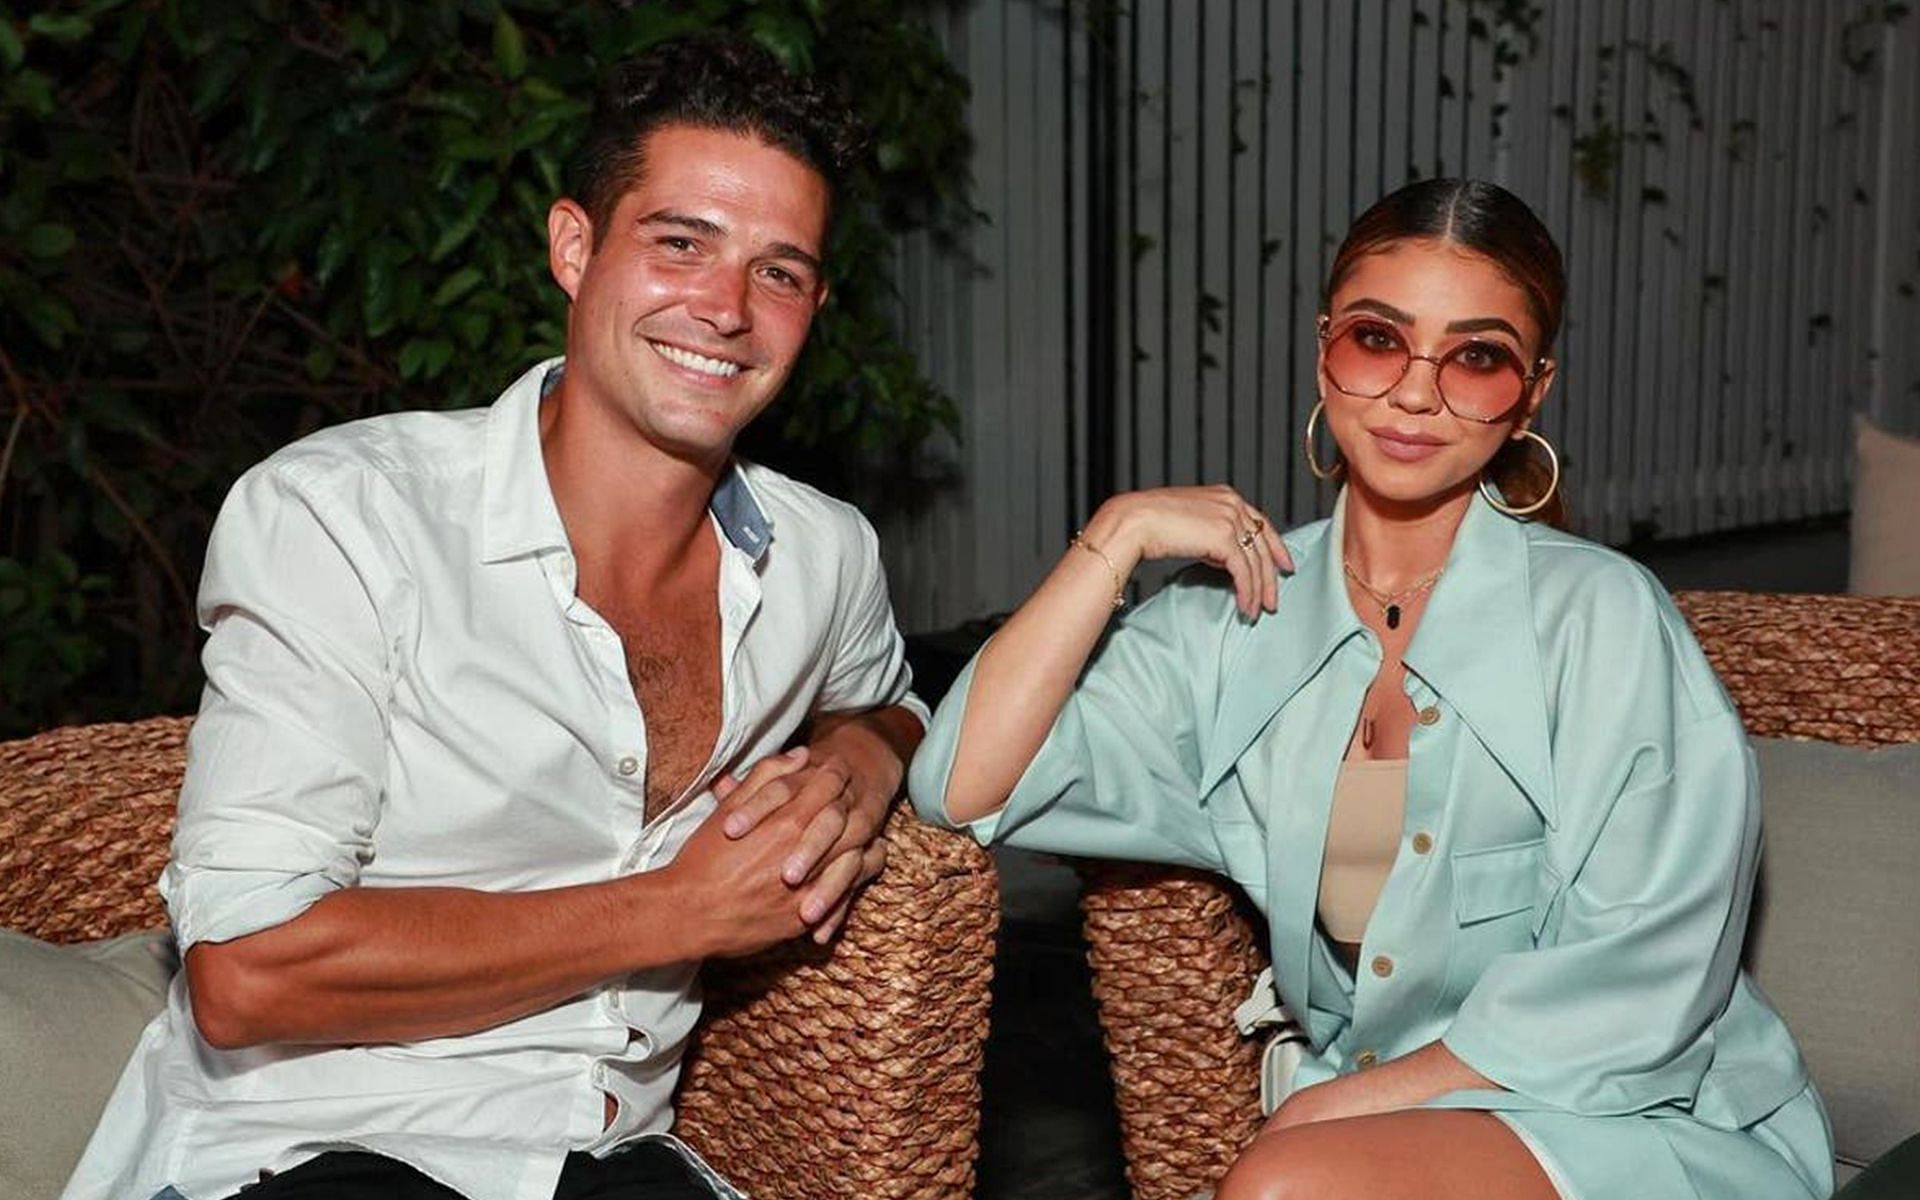 Sarah Hyland and Wells Adams have been engaged since 2019 (Image via Getty Images/ Emma McIntyre)